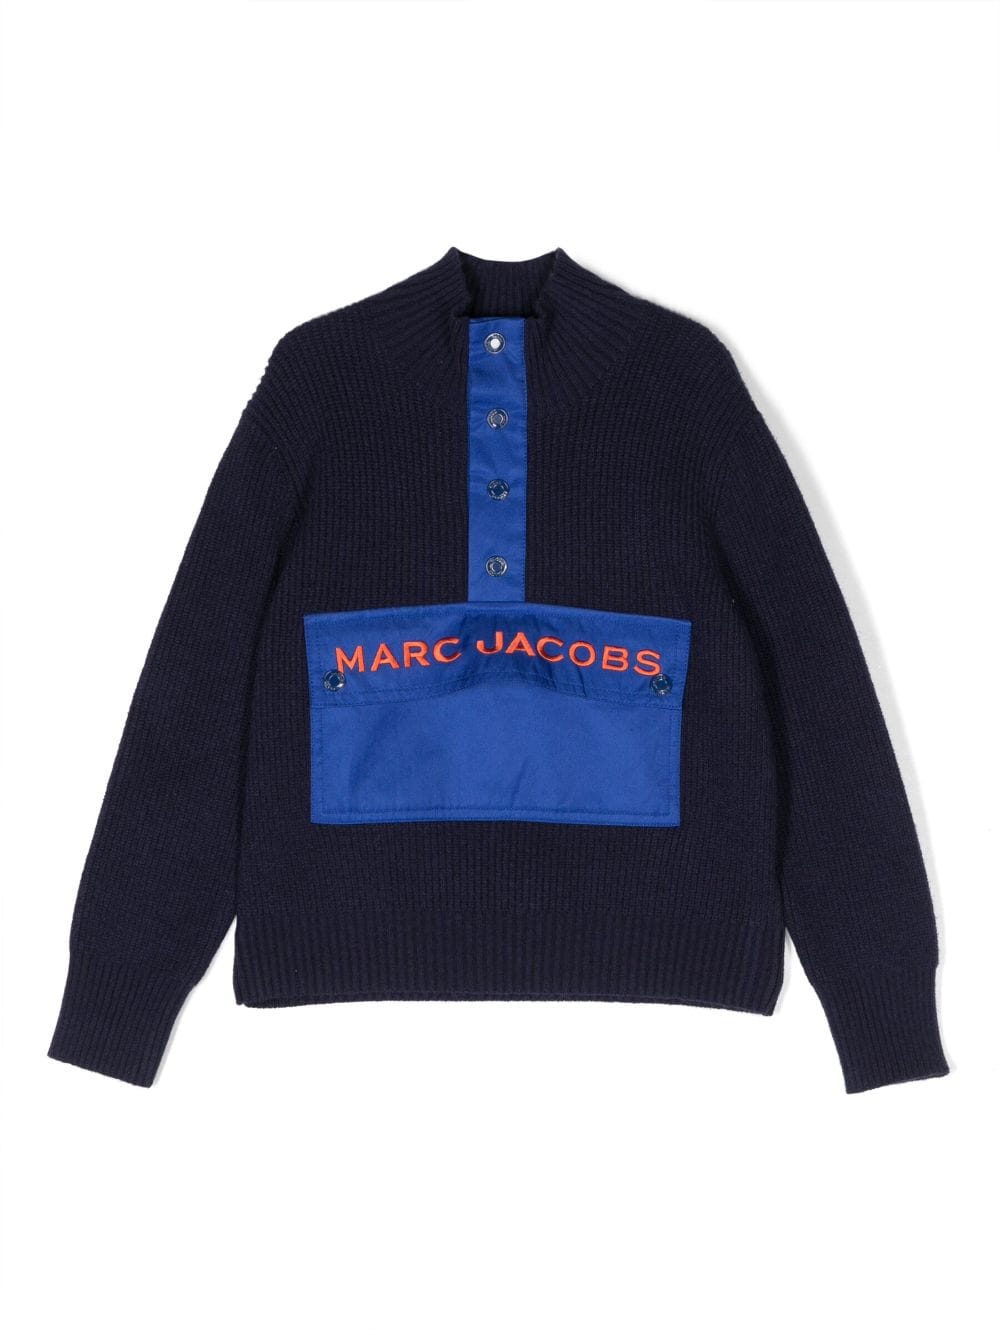 Image 1 of Marc Jacobs Kids button-placket knit top